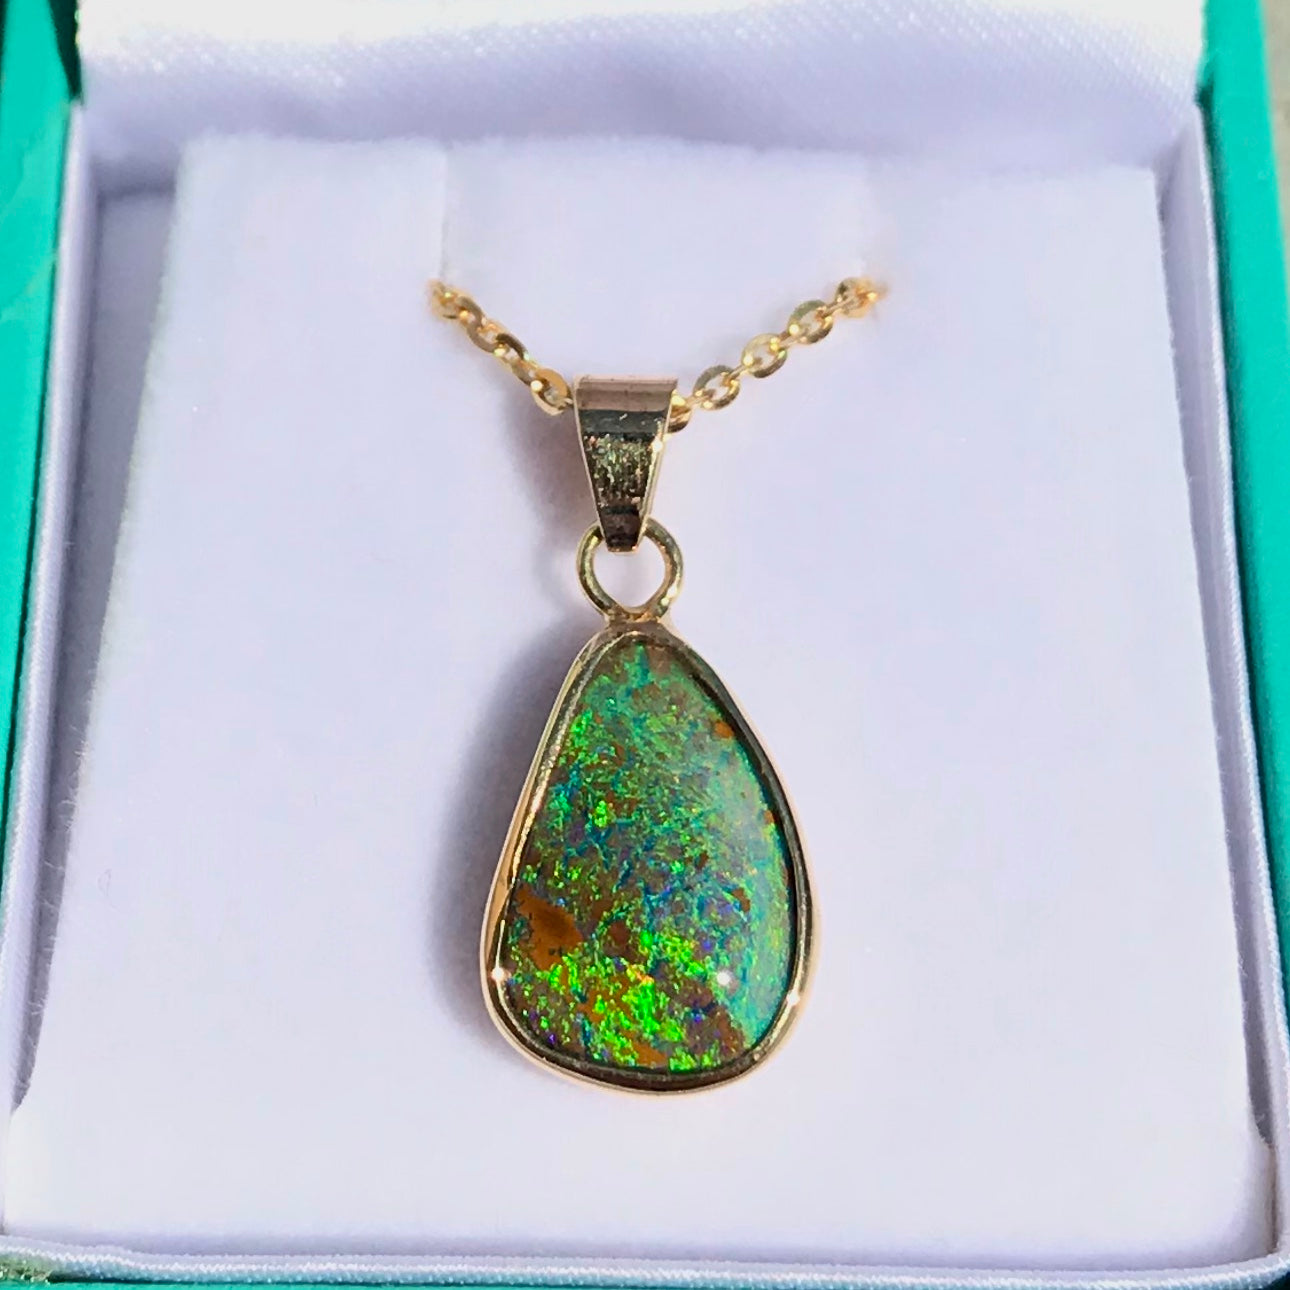 Green and blue Queensland boulder opal pendant in 14k yellow gold on cable chain.